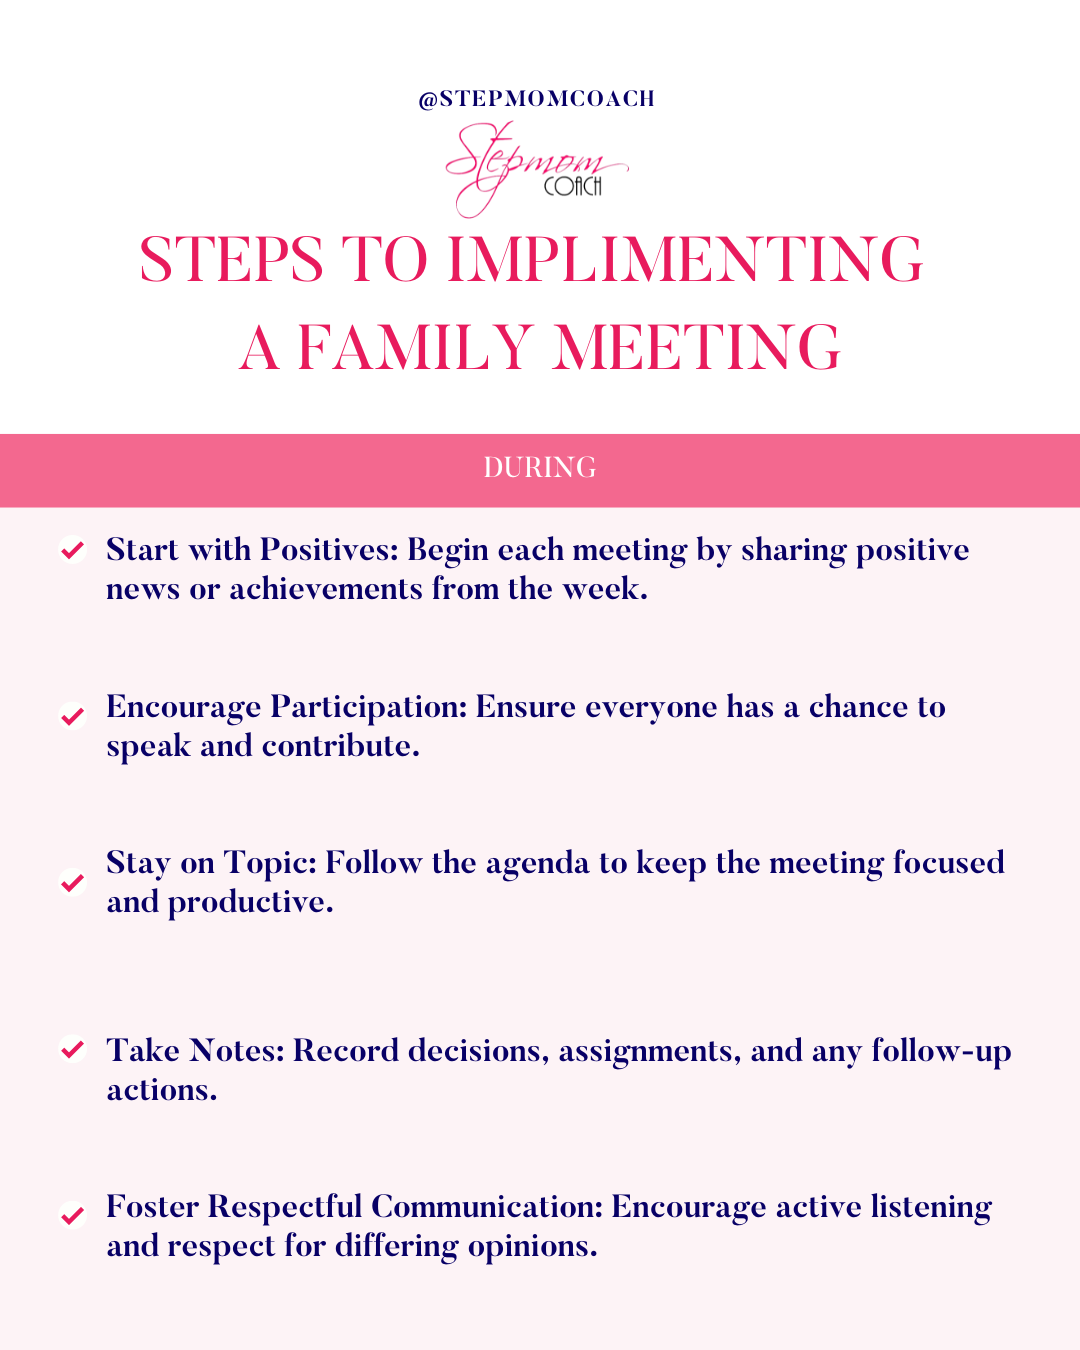 An instructional graphic titled 'Steps to Implementing a Family Meeting' from @StepmomCoach.